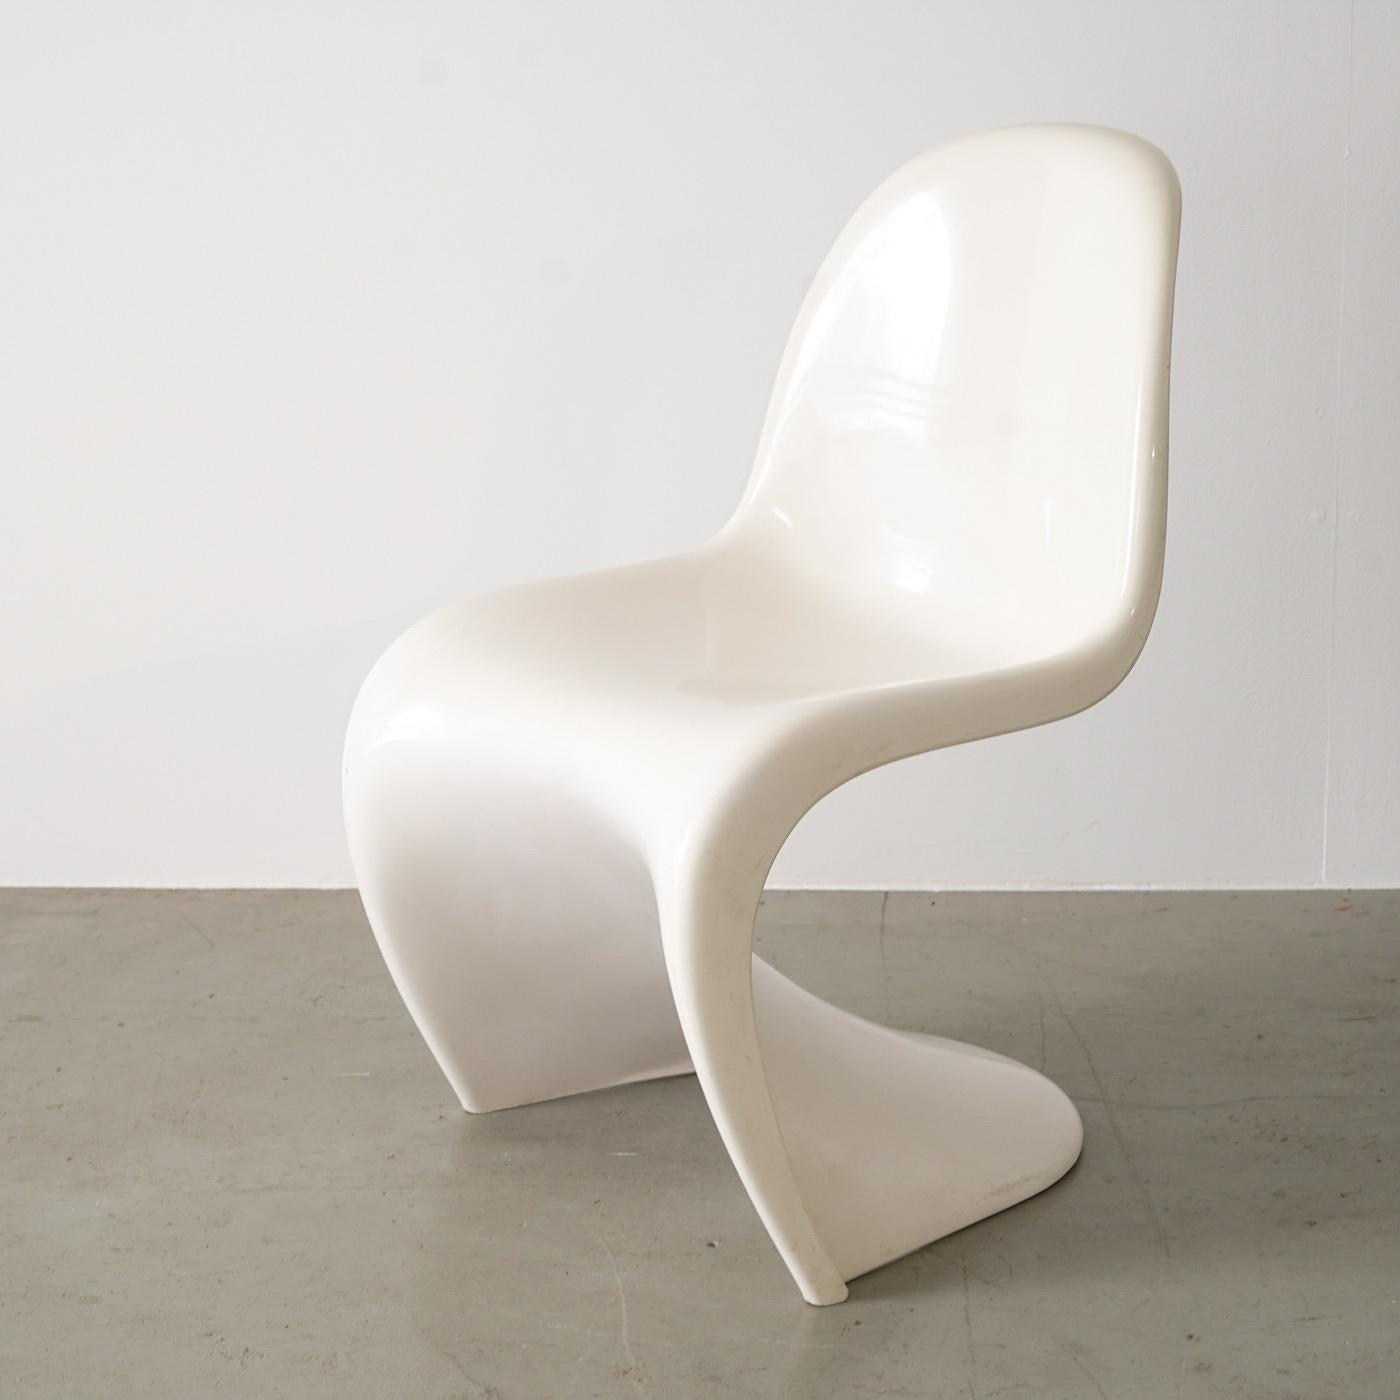 American White Cantilevered S Chair by Verner Panton for Herman Miller, 1972 For Sale